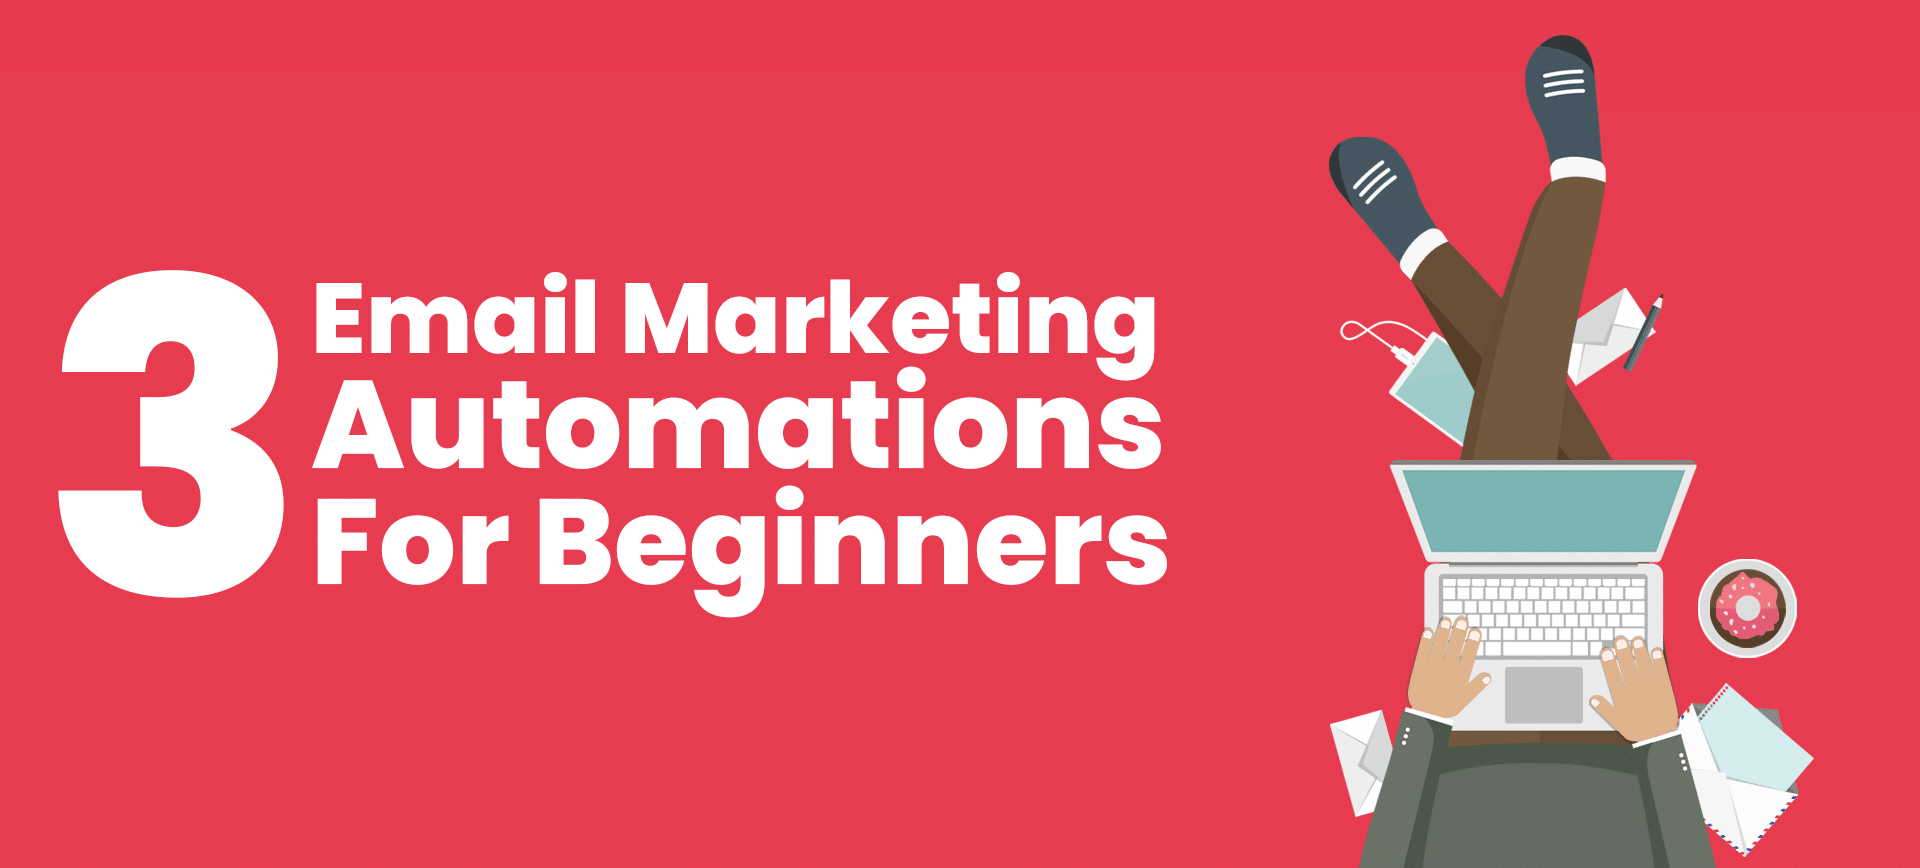 3 Email Marketing Automations For Beginners